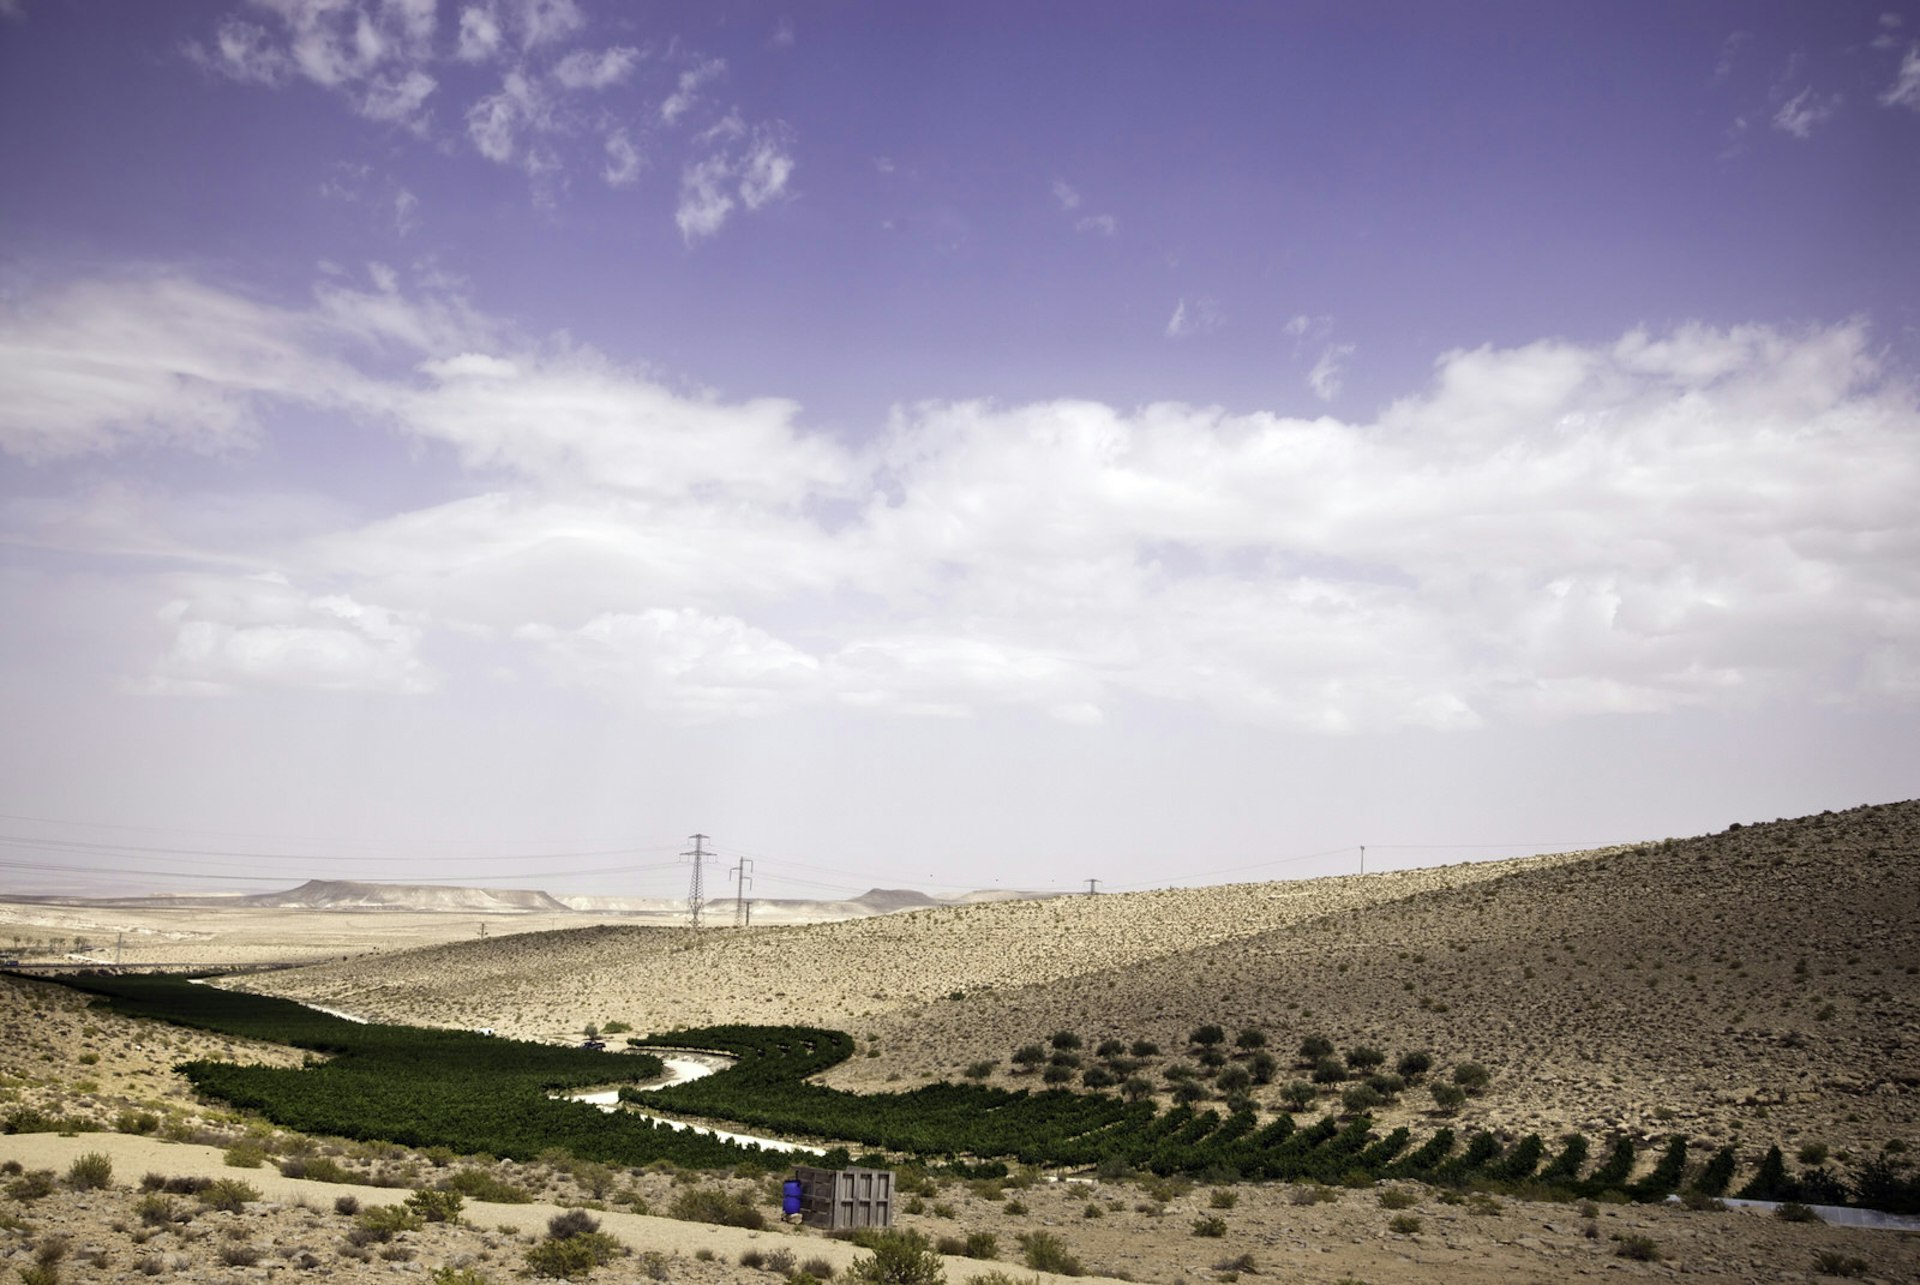 A green patch of vineyard in the Negev desert surrounded by arid sands and distant hills